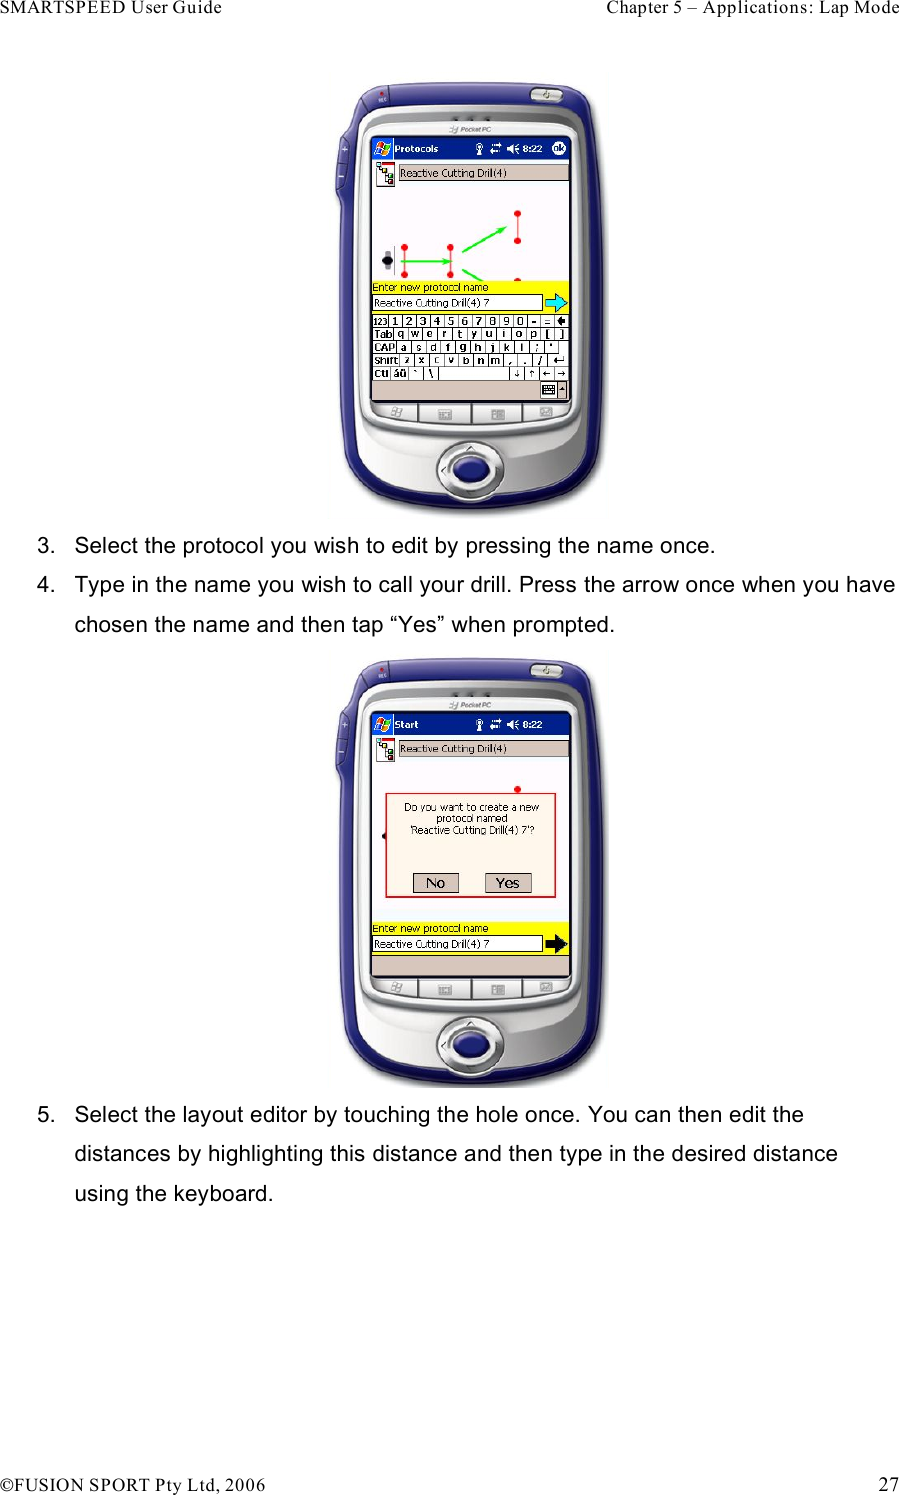 SMARTSPEED User Guide    Chapter 5 – Applications: Lap Mode !FUSION SPORT Pty Ltd, 2006    27  3.  Select the protocol you wish to edit by pressing the name once.  4.  Type in the name you wish to call your drill. Press the arrow once when you have chosen the name and then tap “Yes” when prompted.  5.  Select the layout editor by touching the hole once. You can then edit the distances by highlighting this distance and then type in the desired distance using the keyboard.  